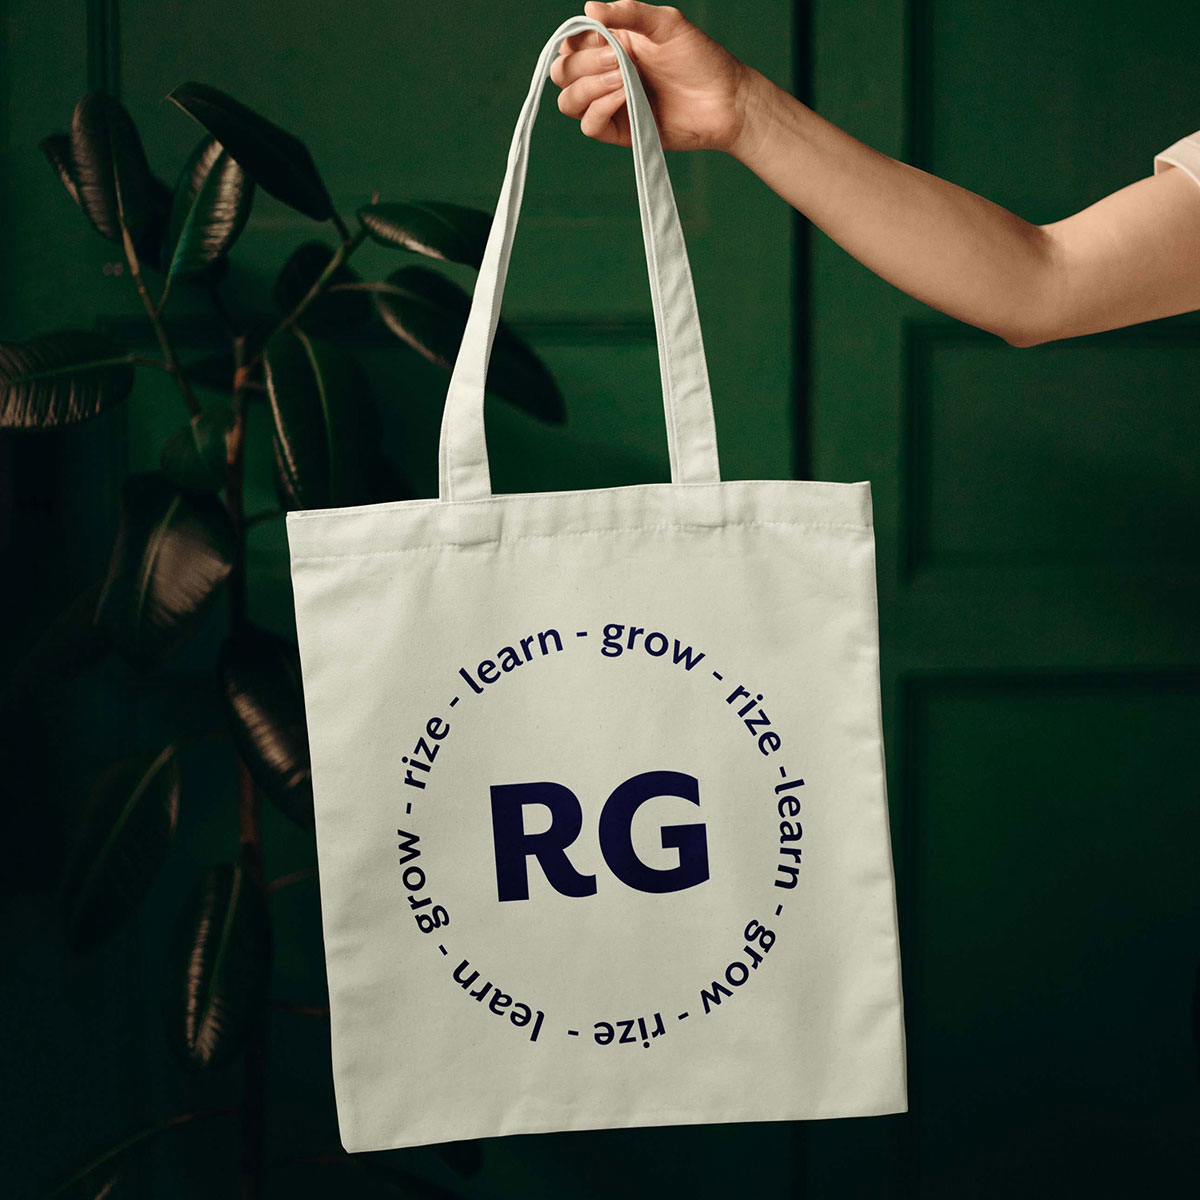 Rize Girl branding on a tote bag – by White Canvas Design